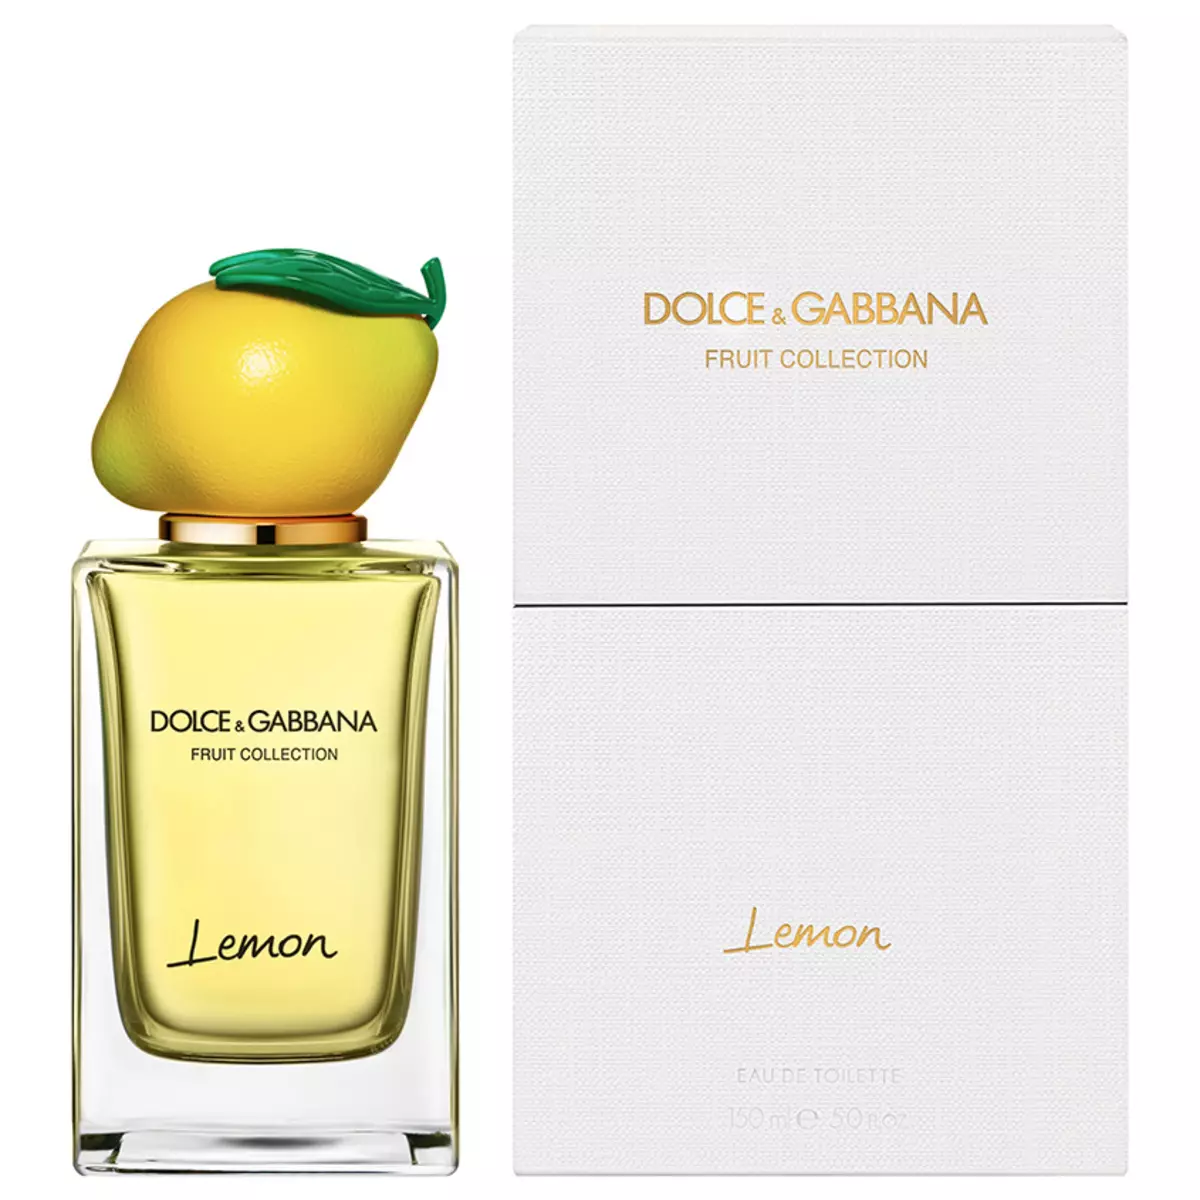 Perfume Dolce & Gabbana and other perfume (50 photos): 3 L'Imperatrice, Women's Eau de Toilette Light Blue, The Only One and other flavors 25150_44